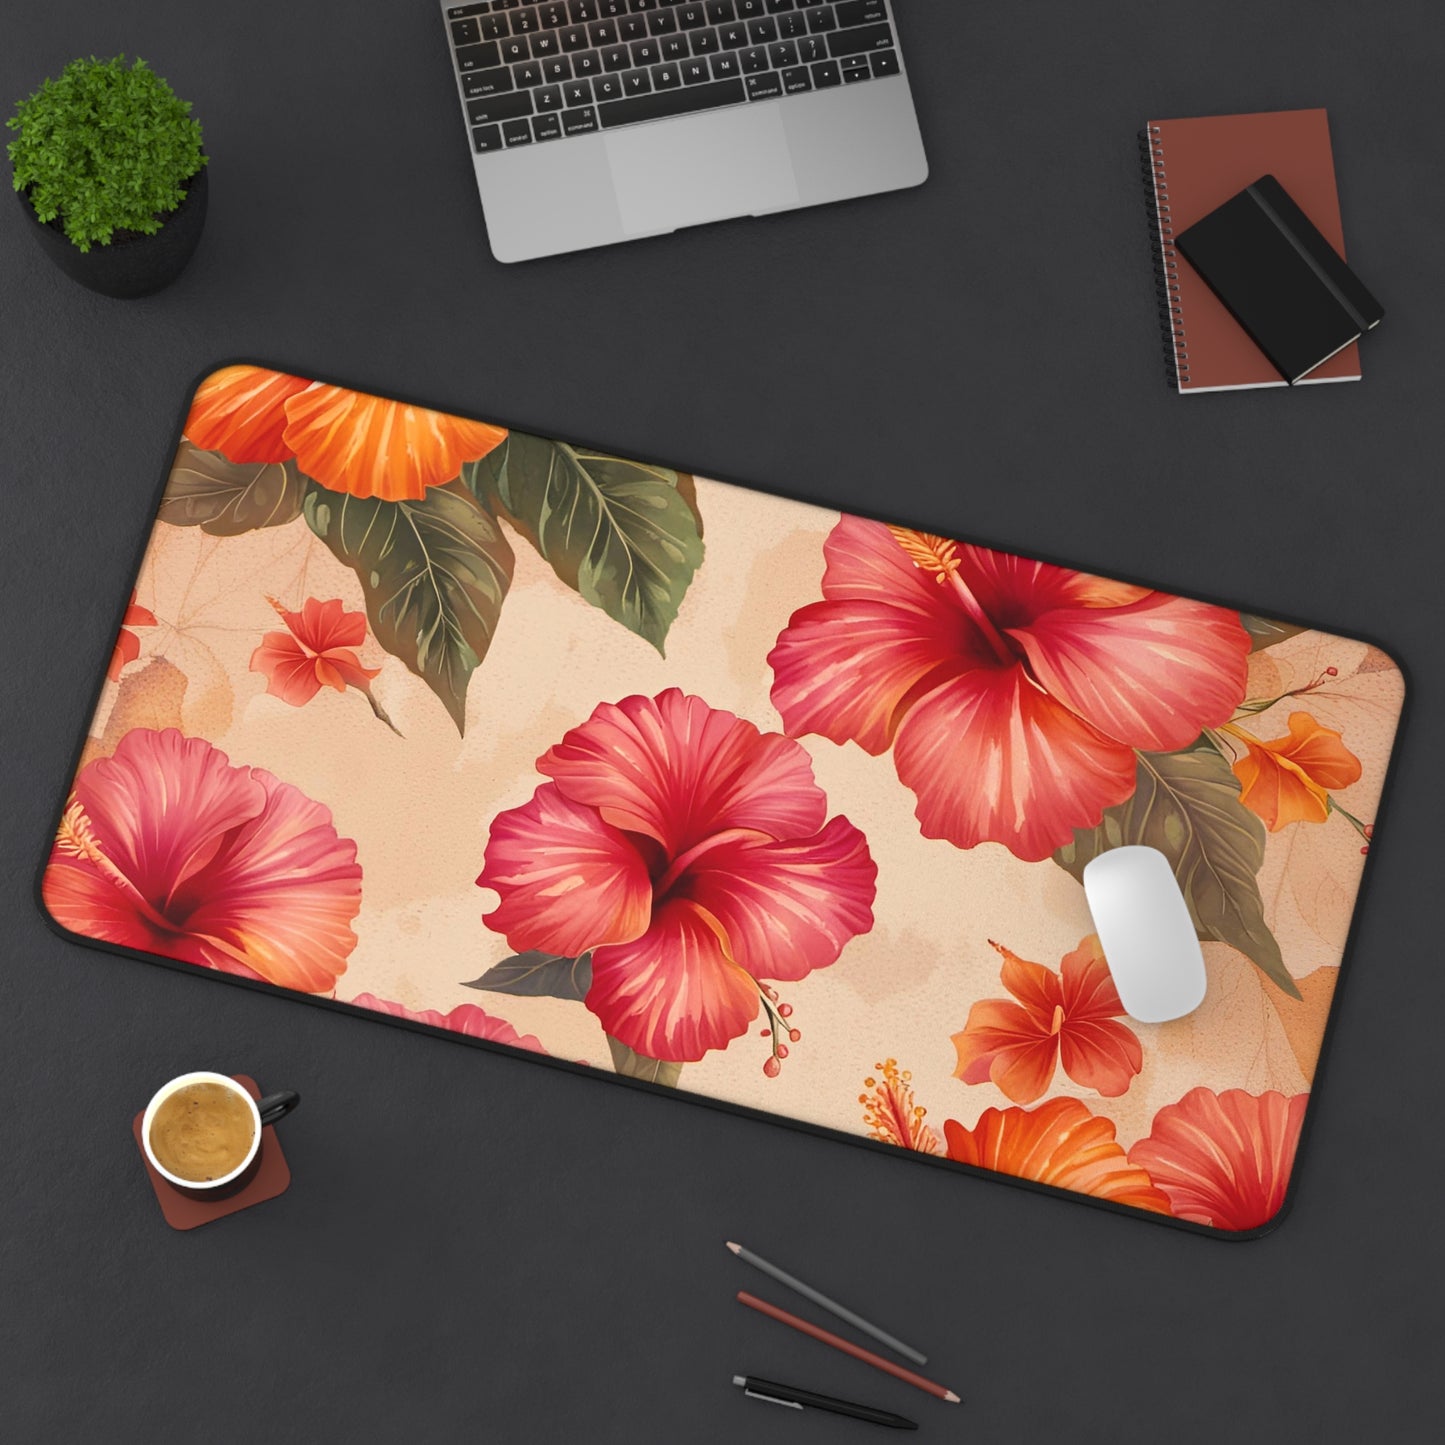 Hibiscus Flowers on Distressed Background Printed on Desk mat 15x31 on desk